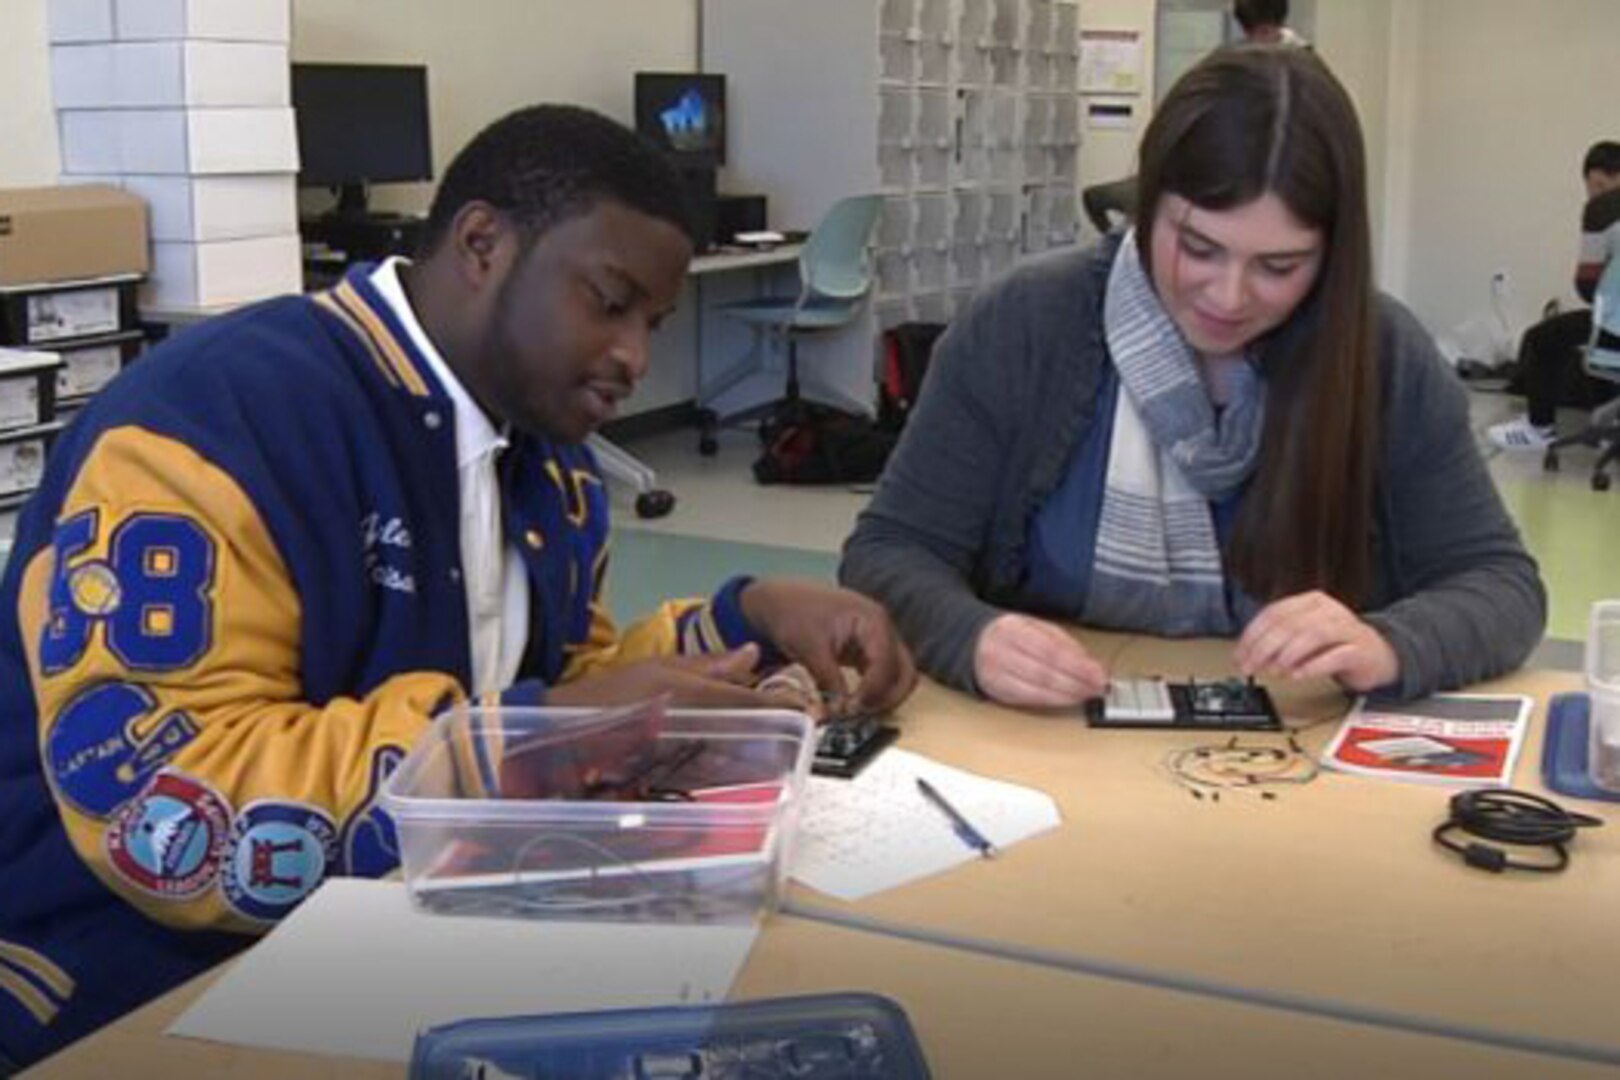 Two students sit at a table and work on a project.